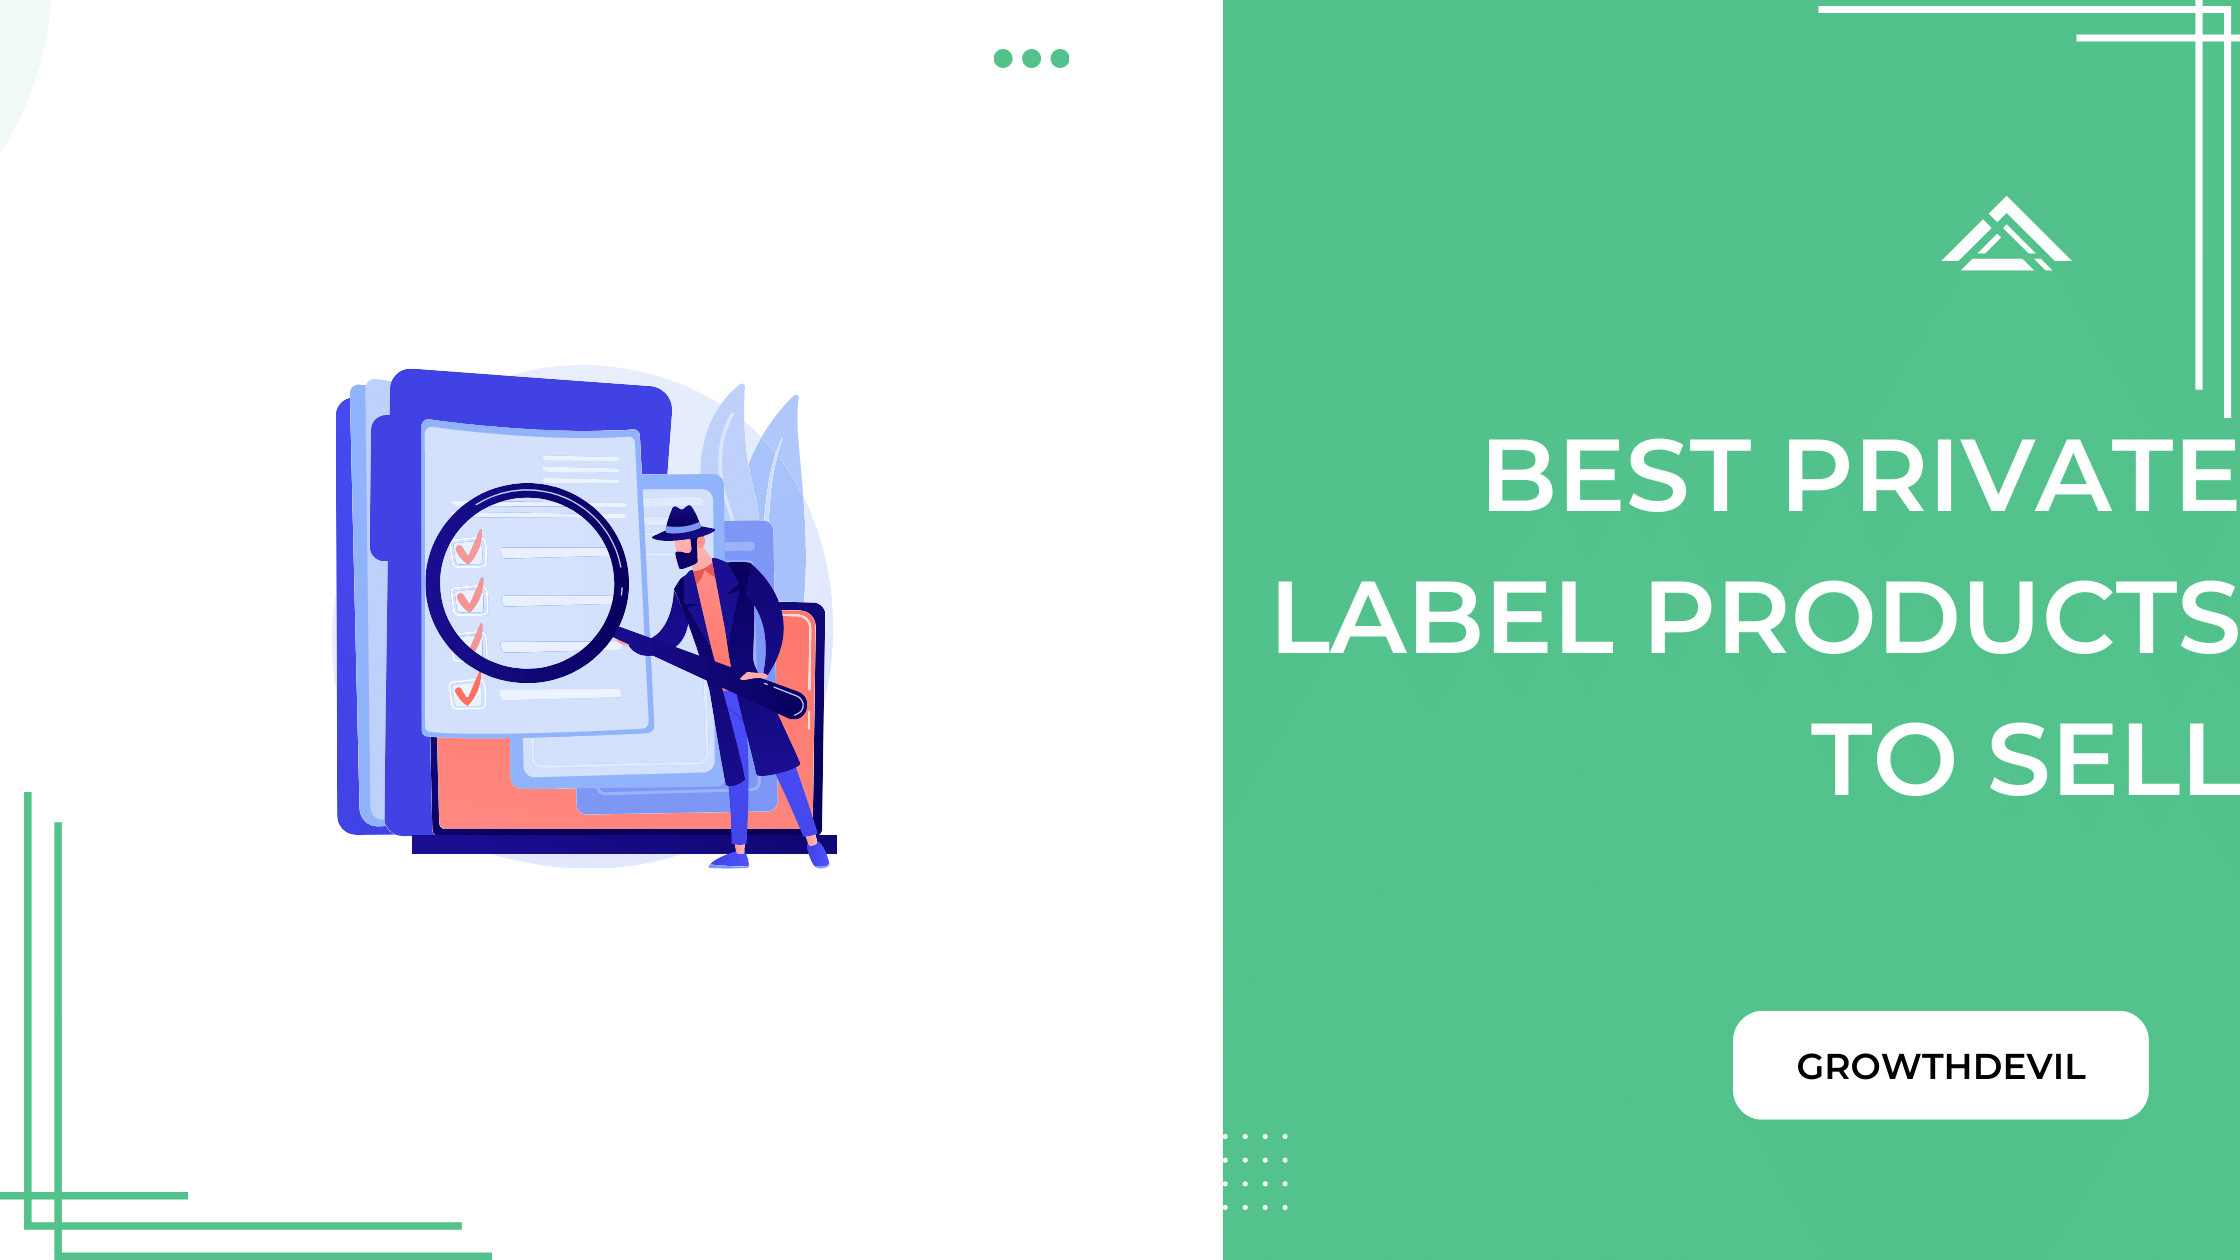 Best Private Label Products To Sell - GrowthDevil